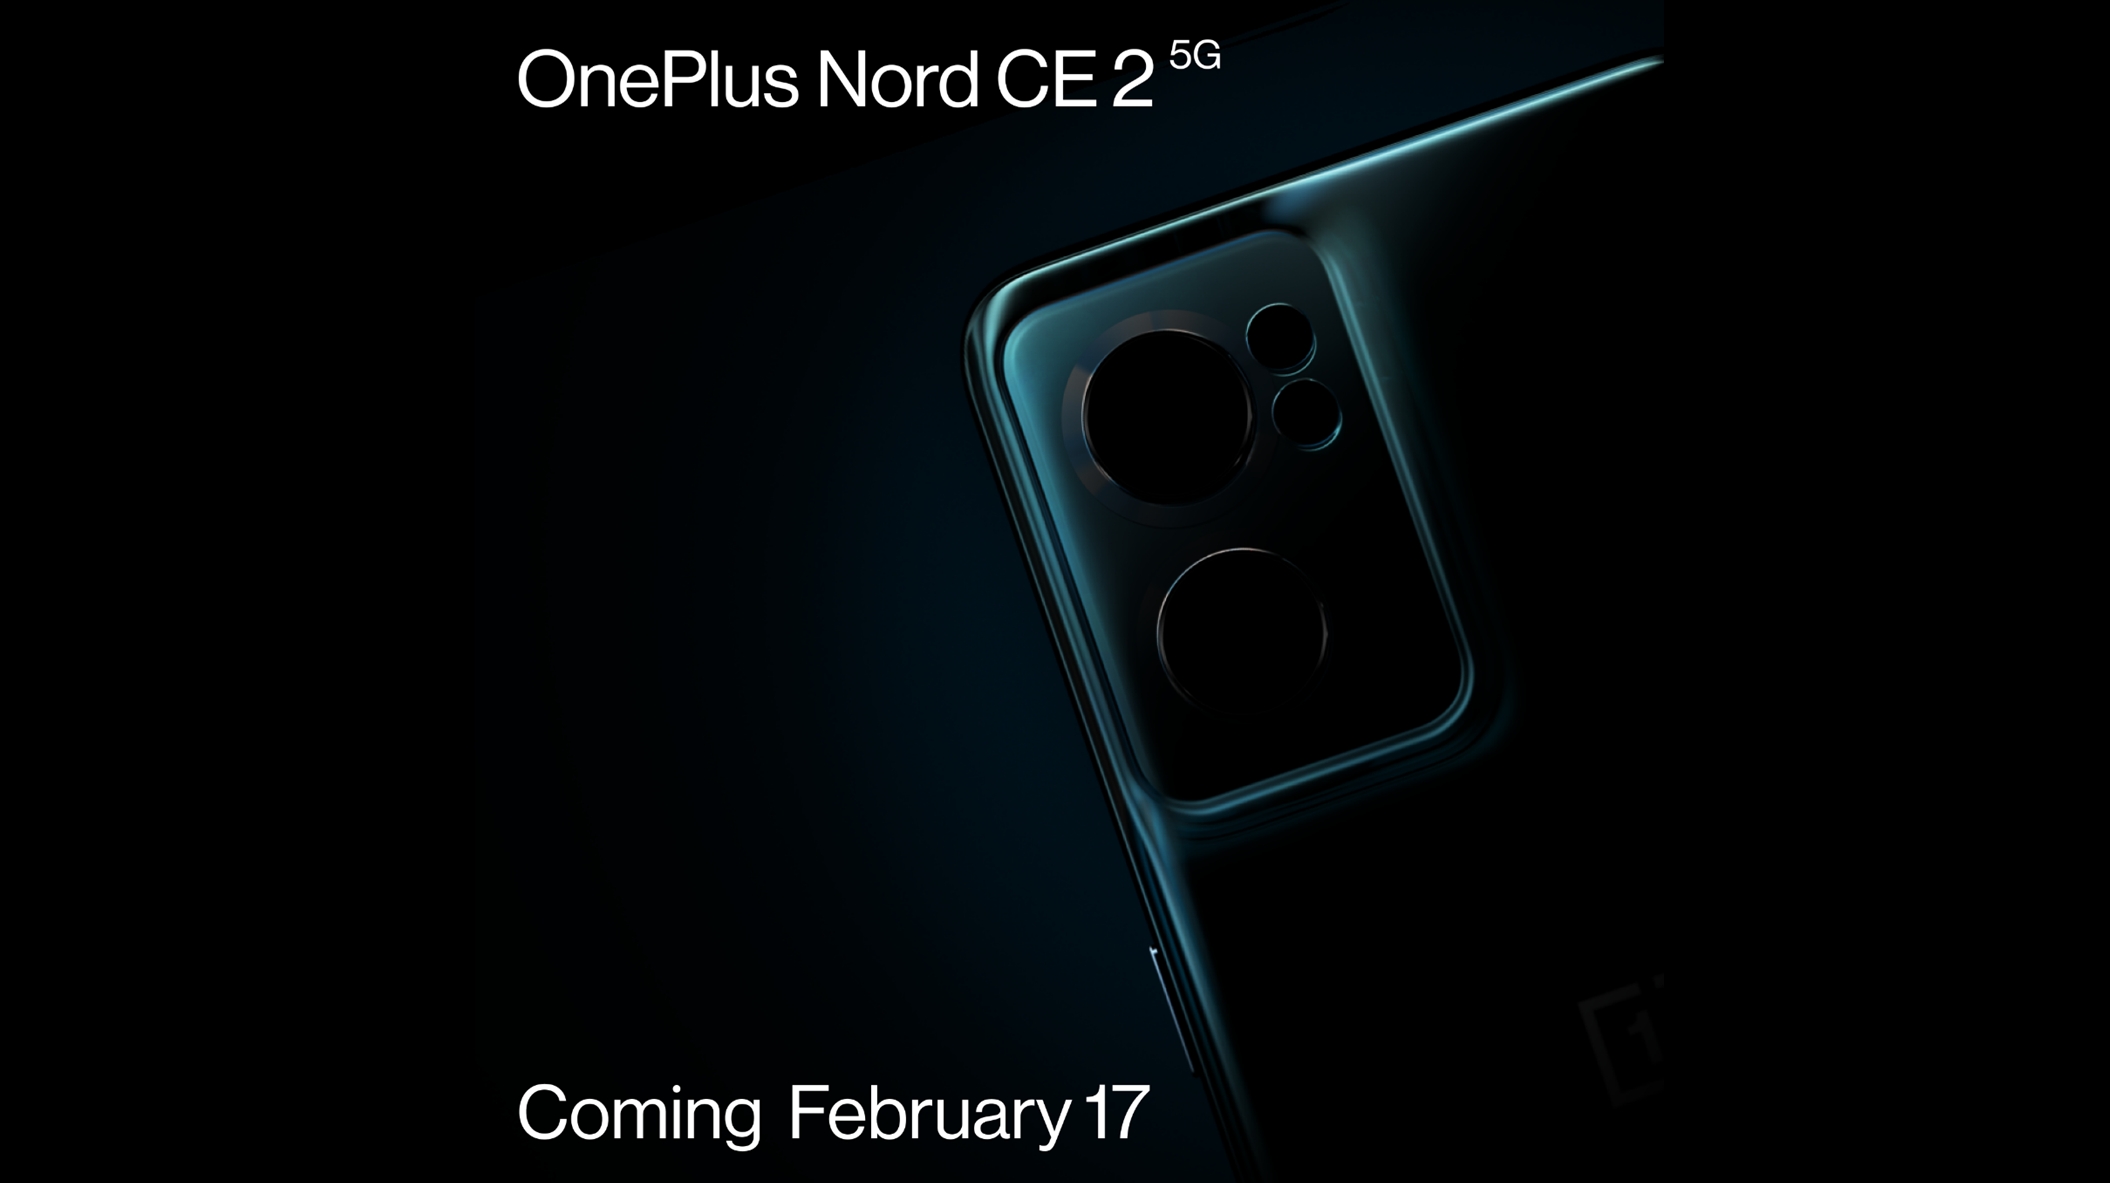 A teaser for the OnePlus Nord CE 2